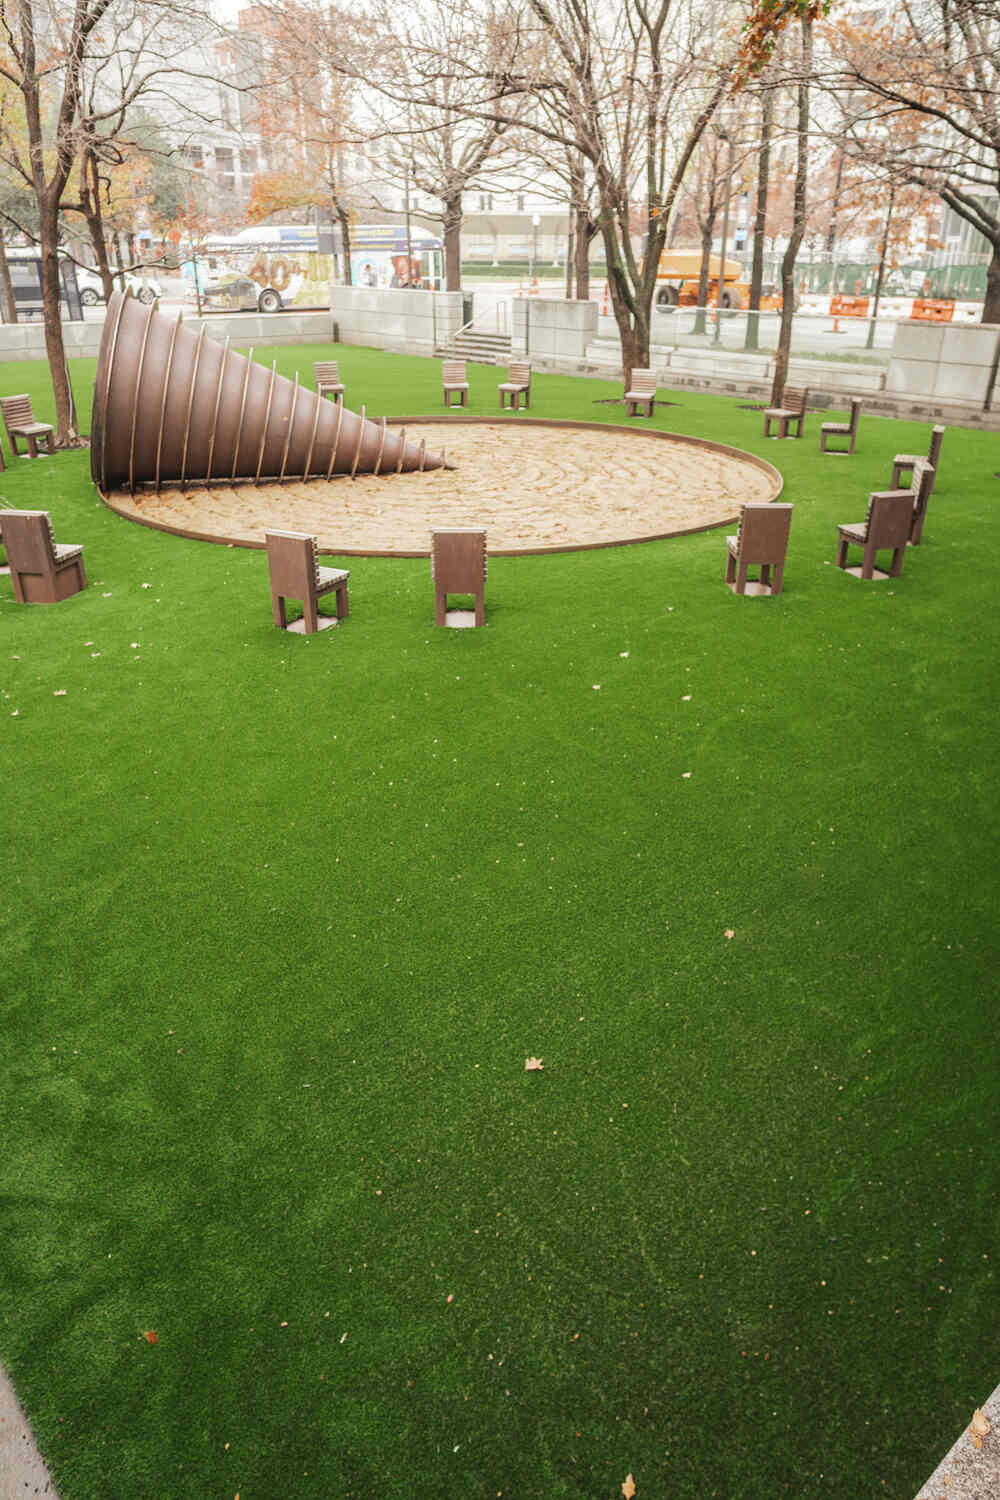 Amenity Lawns in Artificial Grass by WinterGreen Synthetic Grass. Commercial property projects